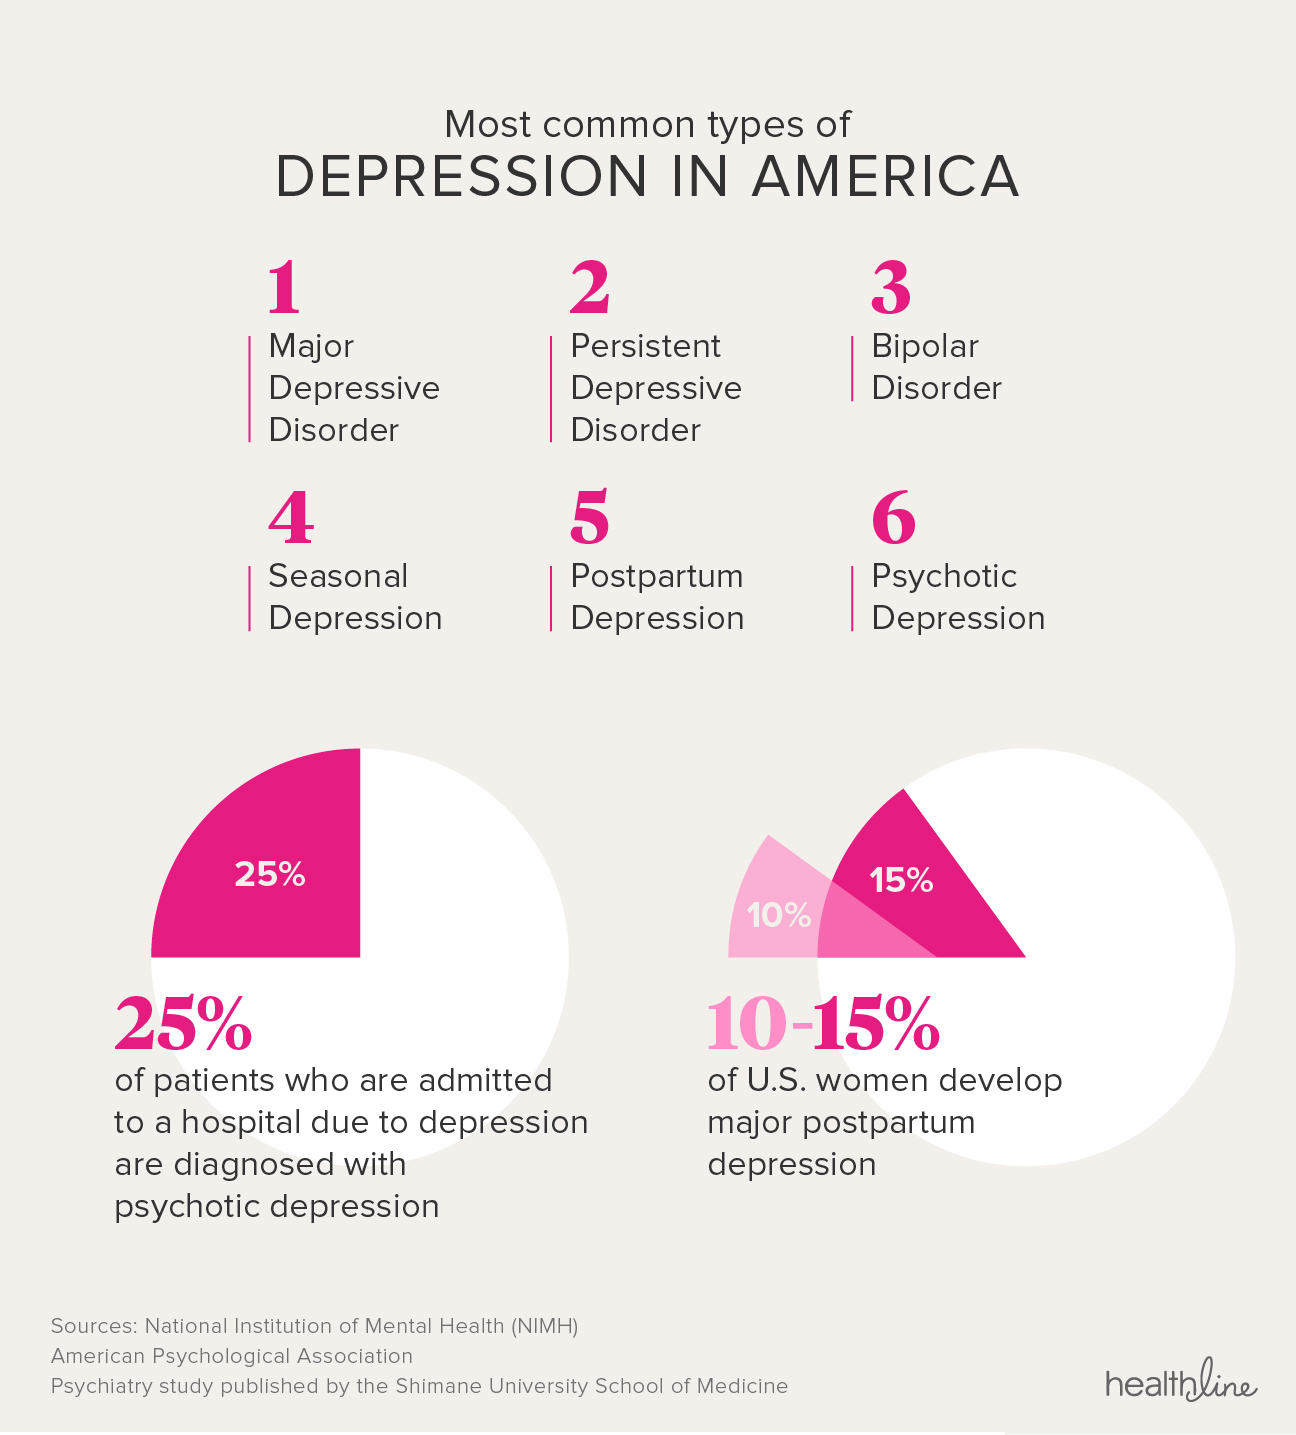 A chart showing the most common types of depression in America.